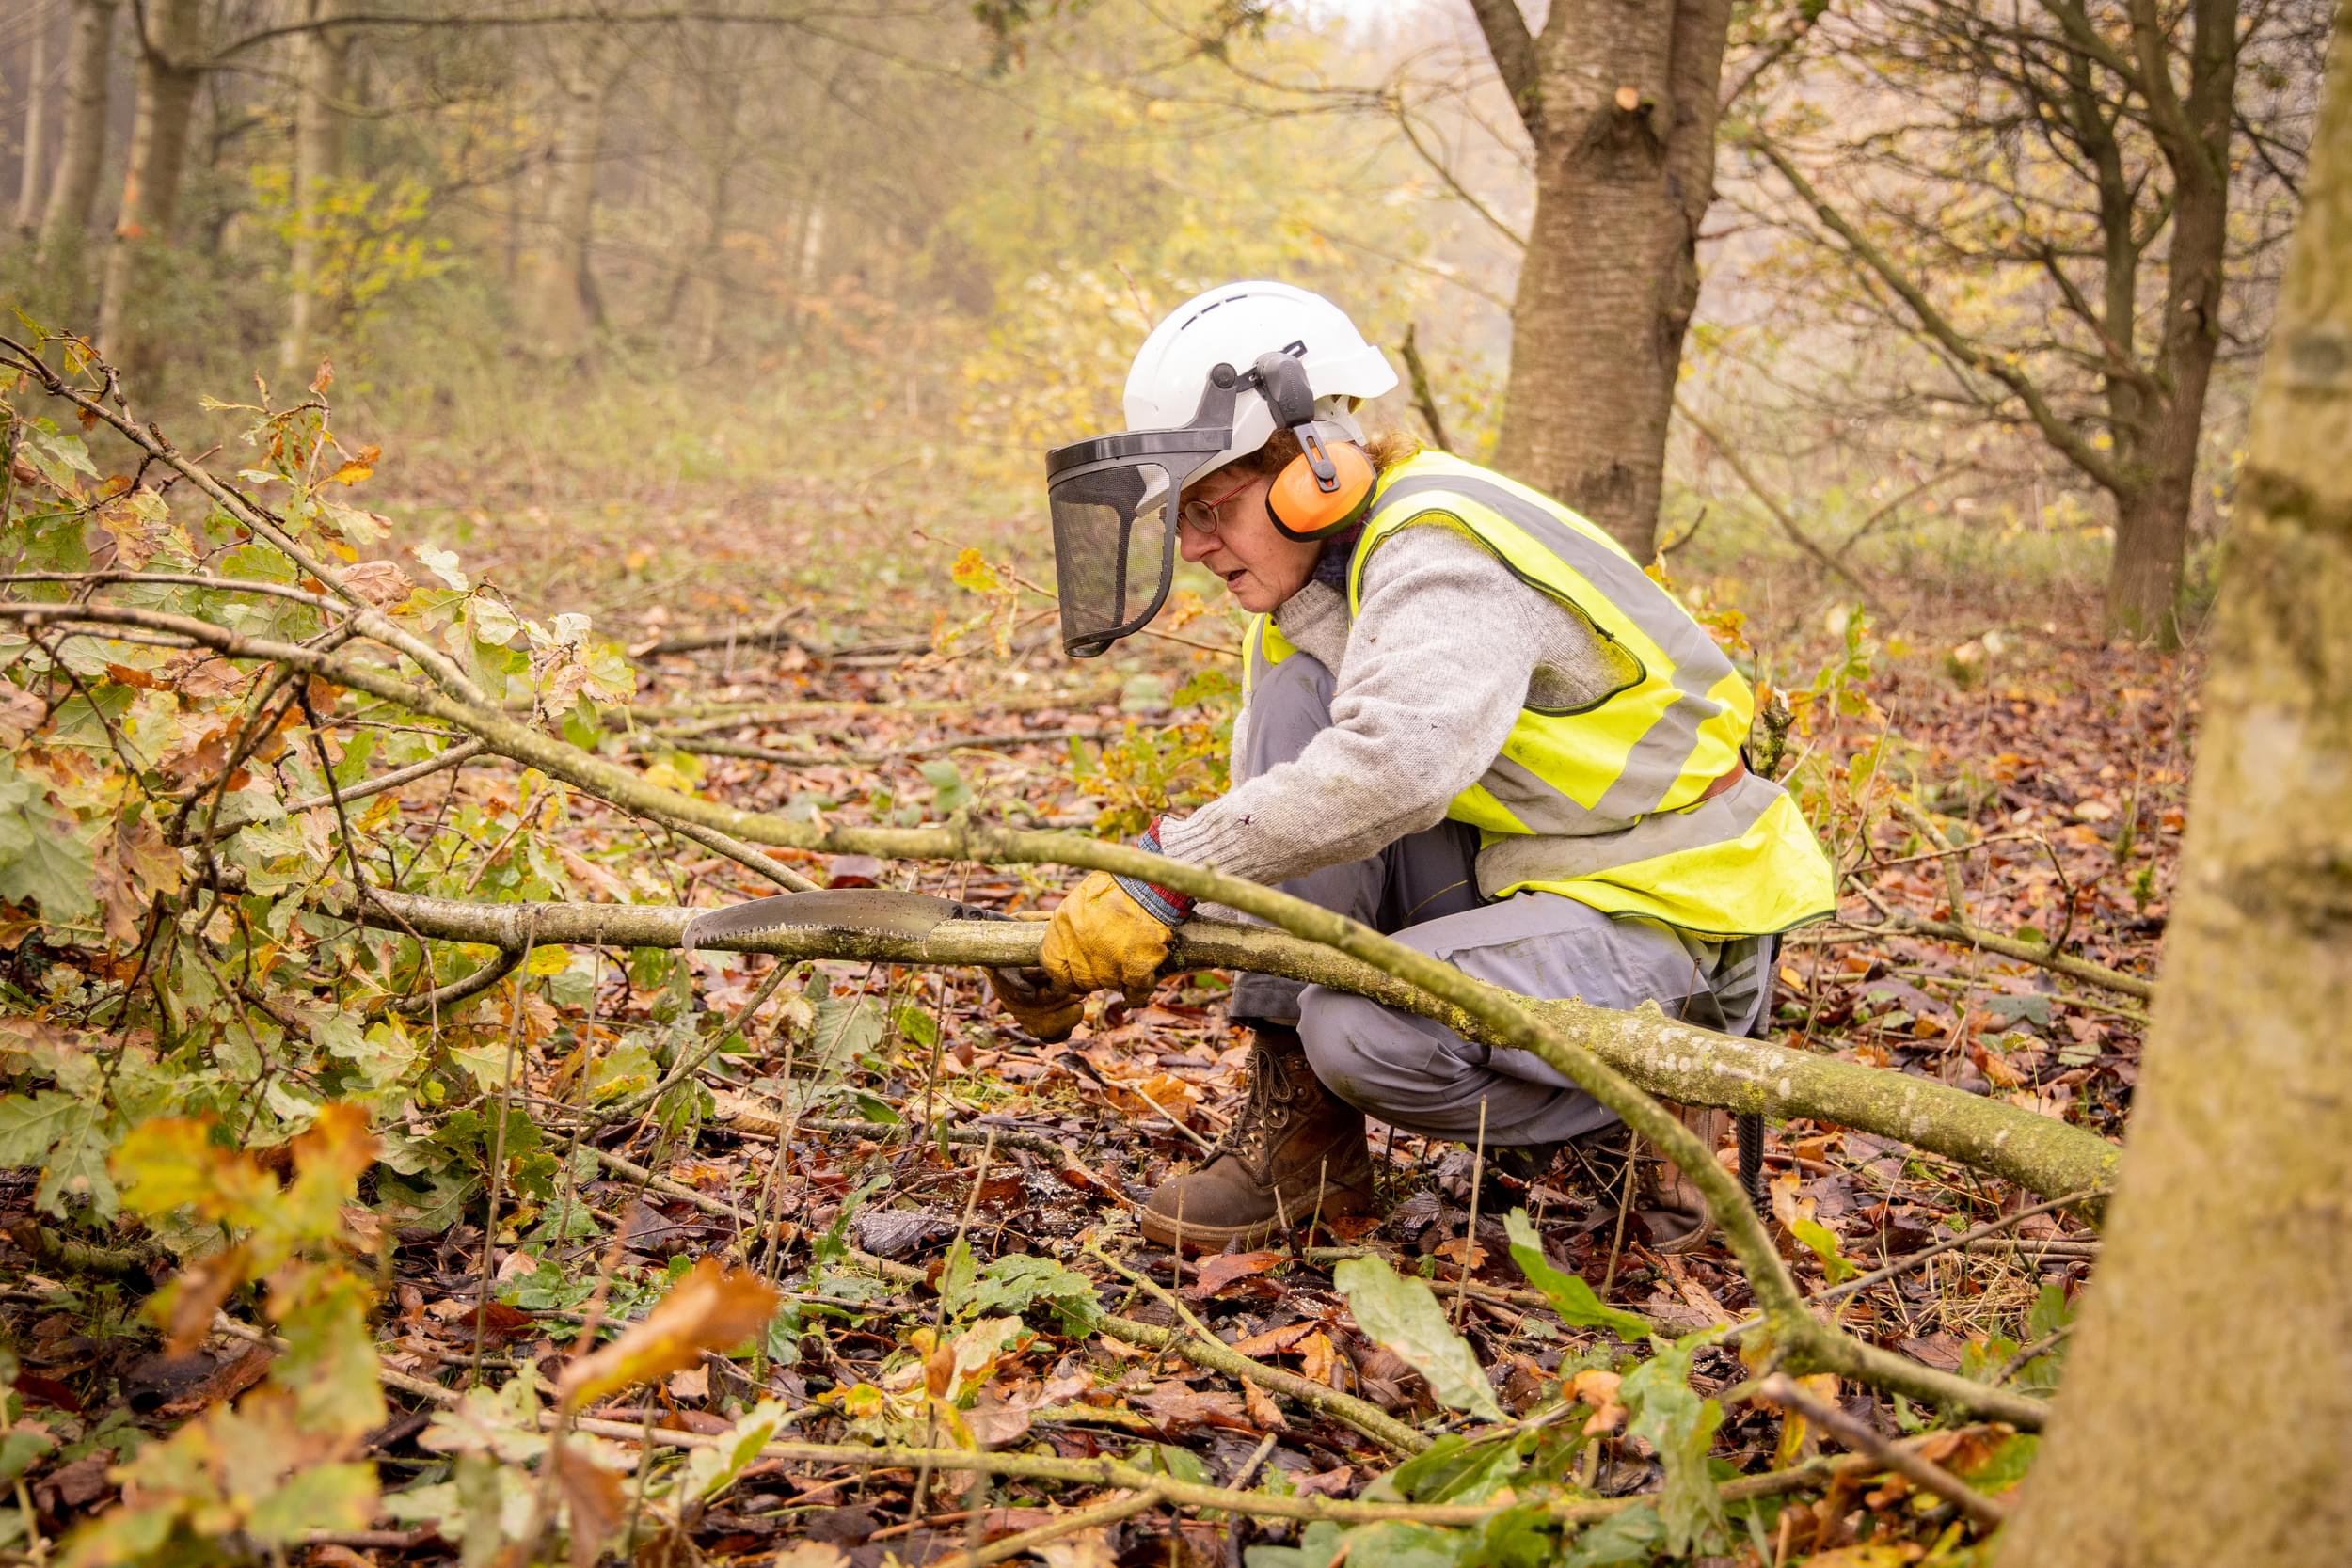 A volunteer, wearing PPE, cuts a small branch within an area of woodland